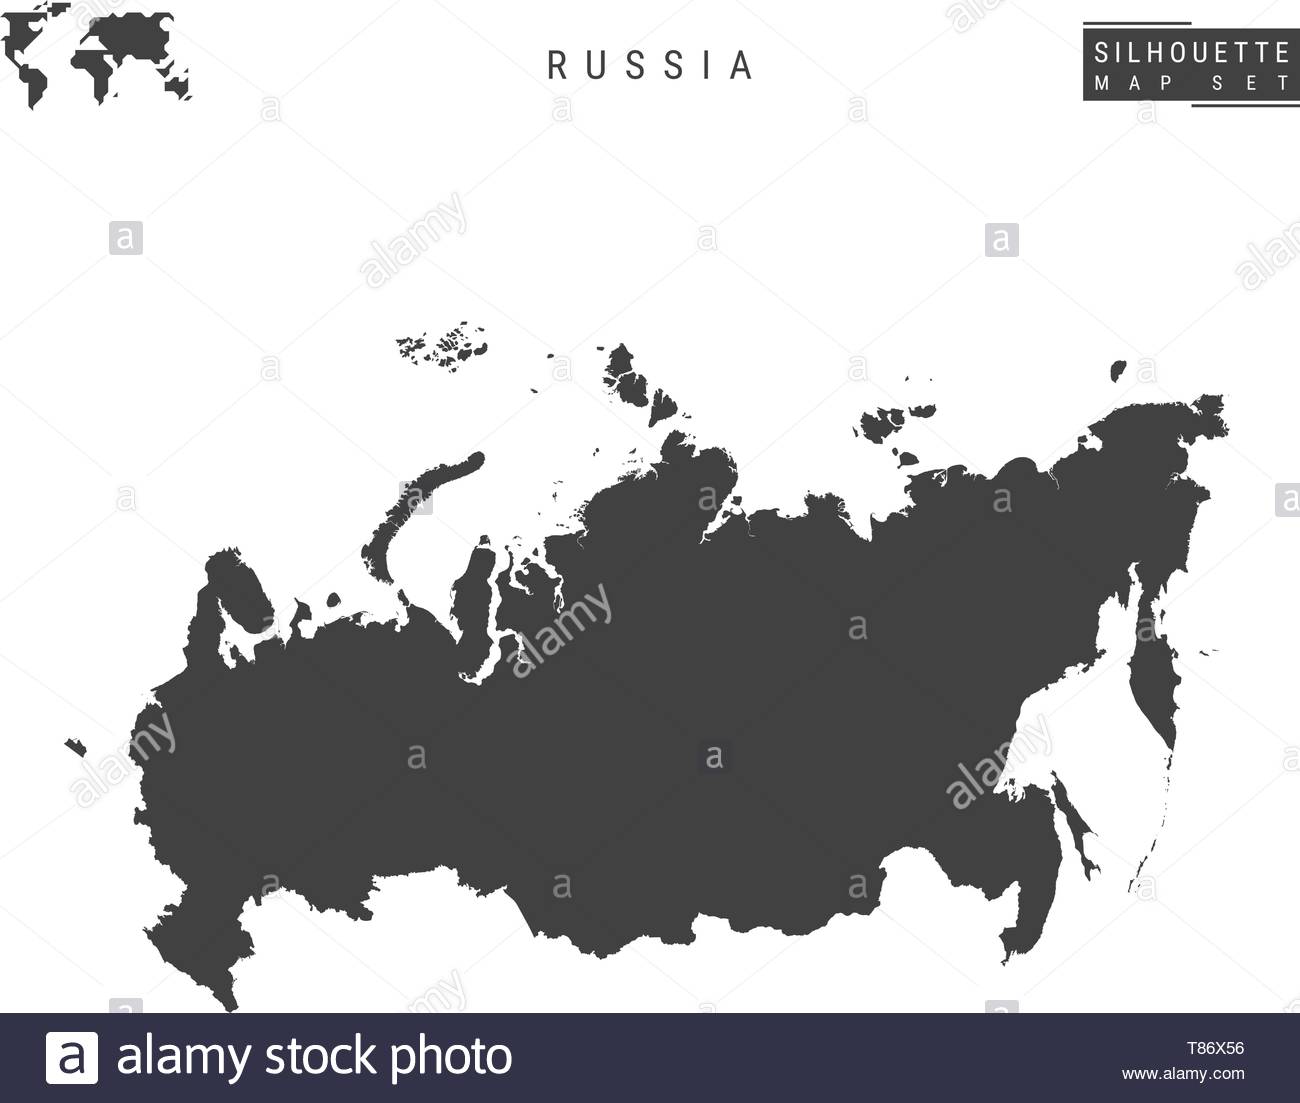 russia-blank-vector-map-isolated-on-white-background-high-detailed-black-silhouette-map-of-russia-t86x56.jpg